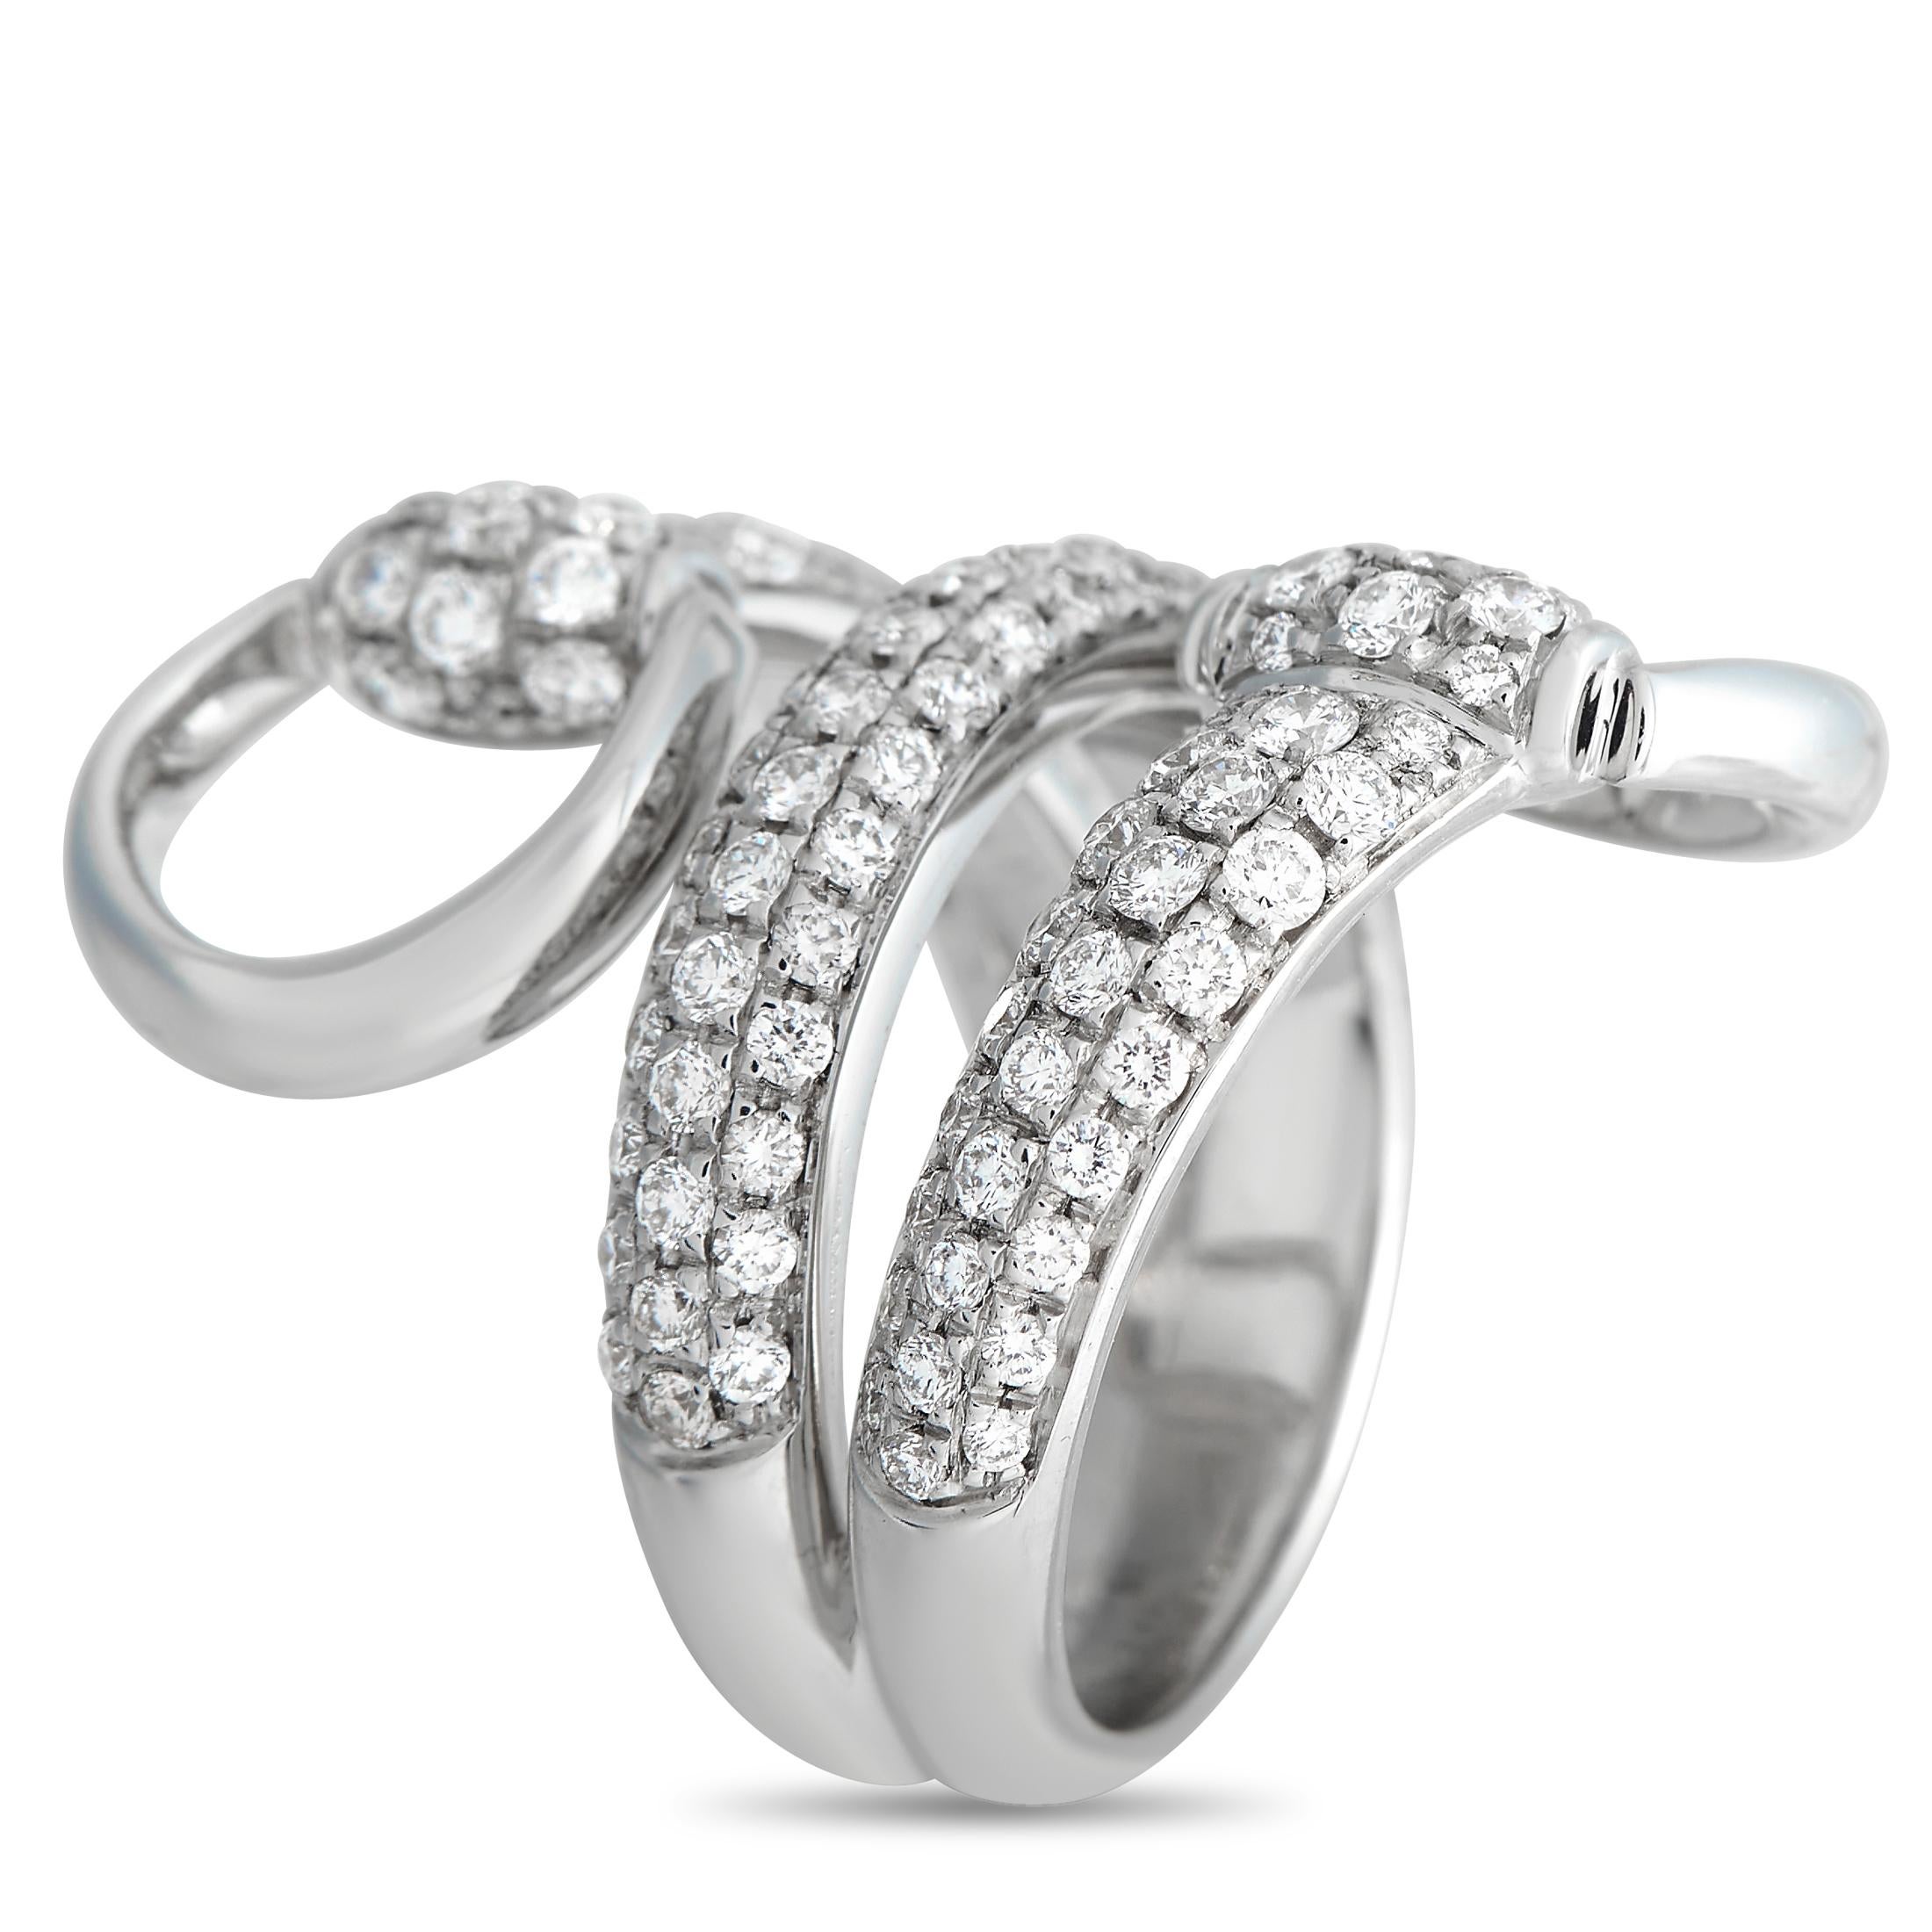 This Gucci Horsebit ring brings one of the brand’s most iconic motifs to life. This elegant, equestrian-inspired accessory features an 18K White Gold wrapped setting that measures 7mm wide and features a top height measuring 2mm. Diamonds totaling